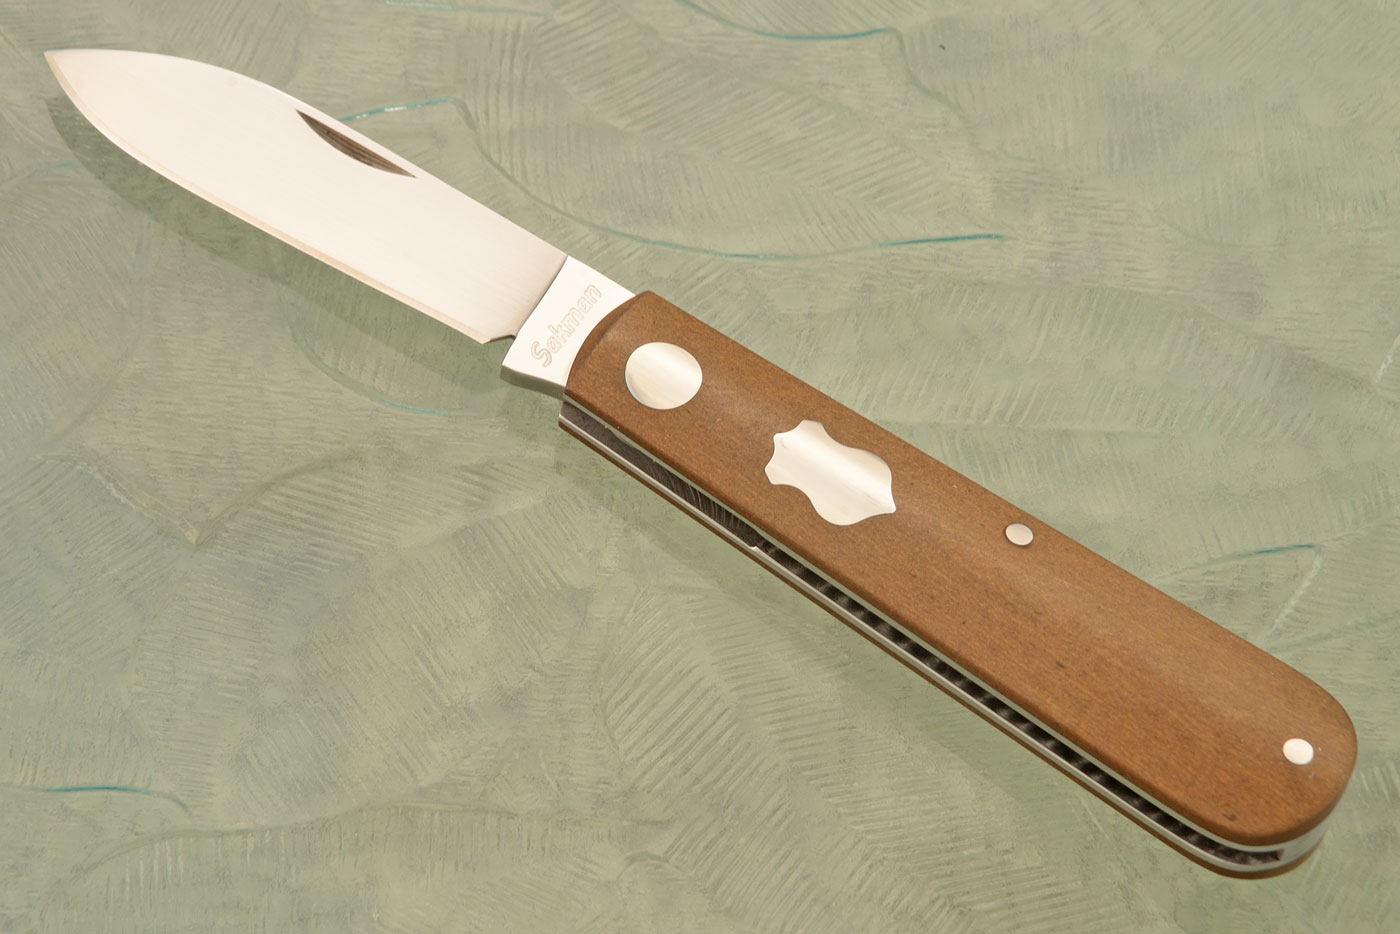 Oryx Slipjoint with Brown Richlite